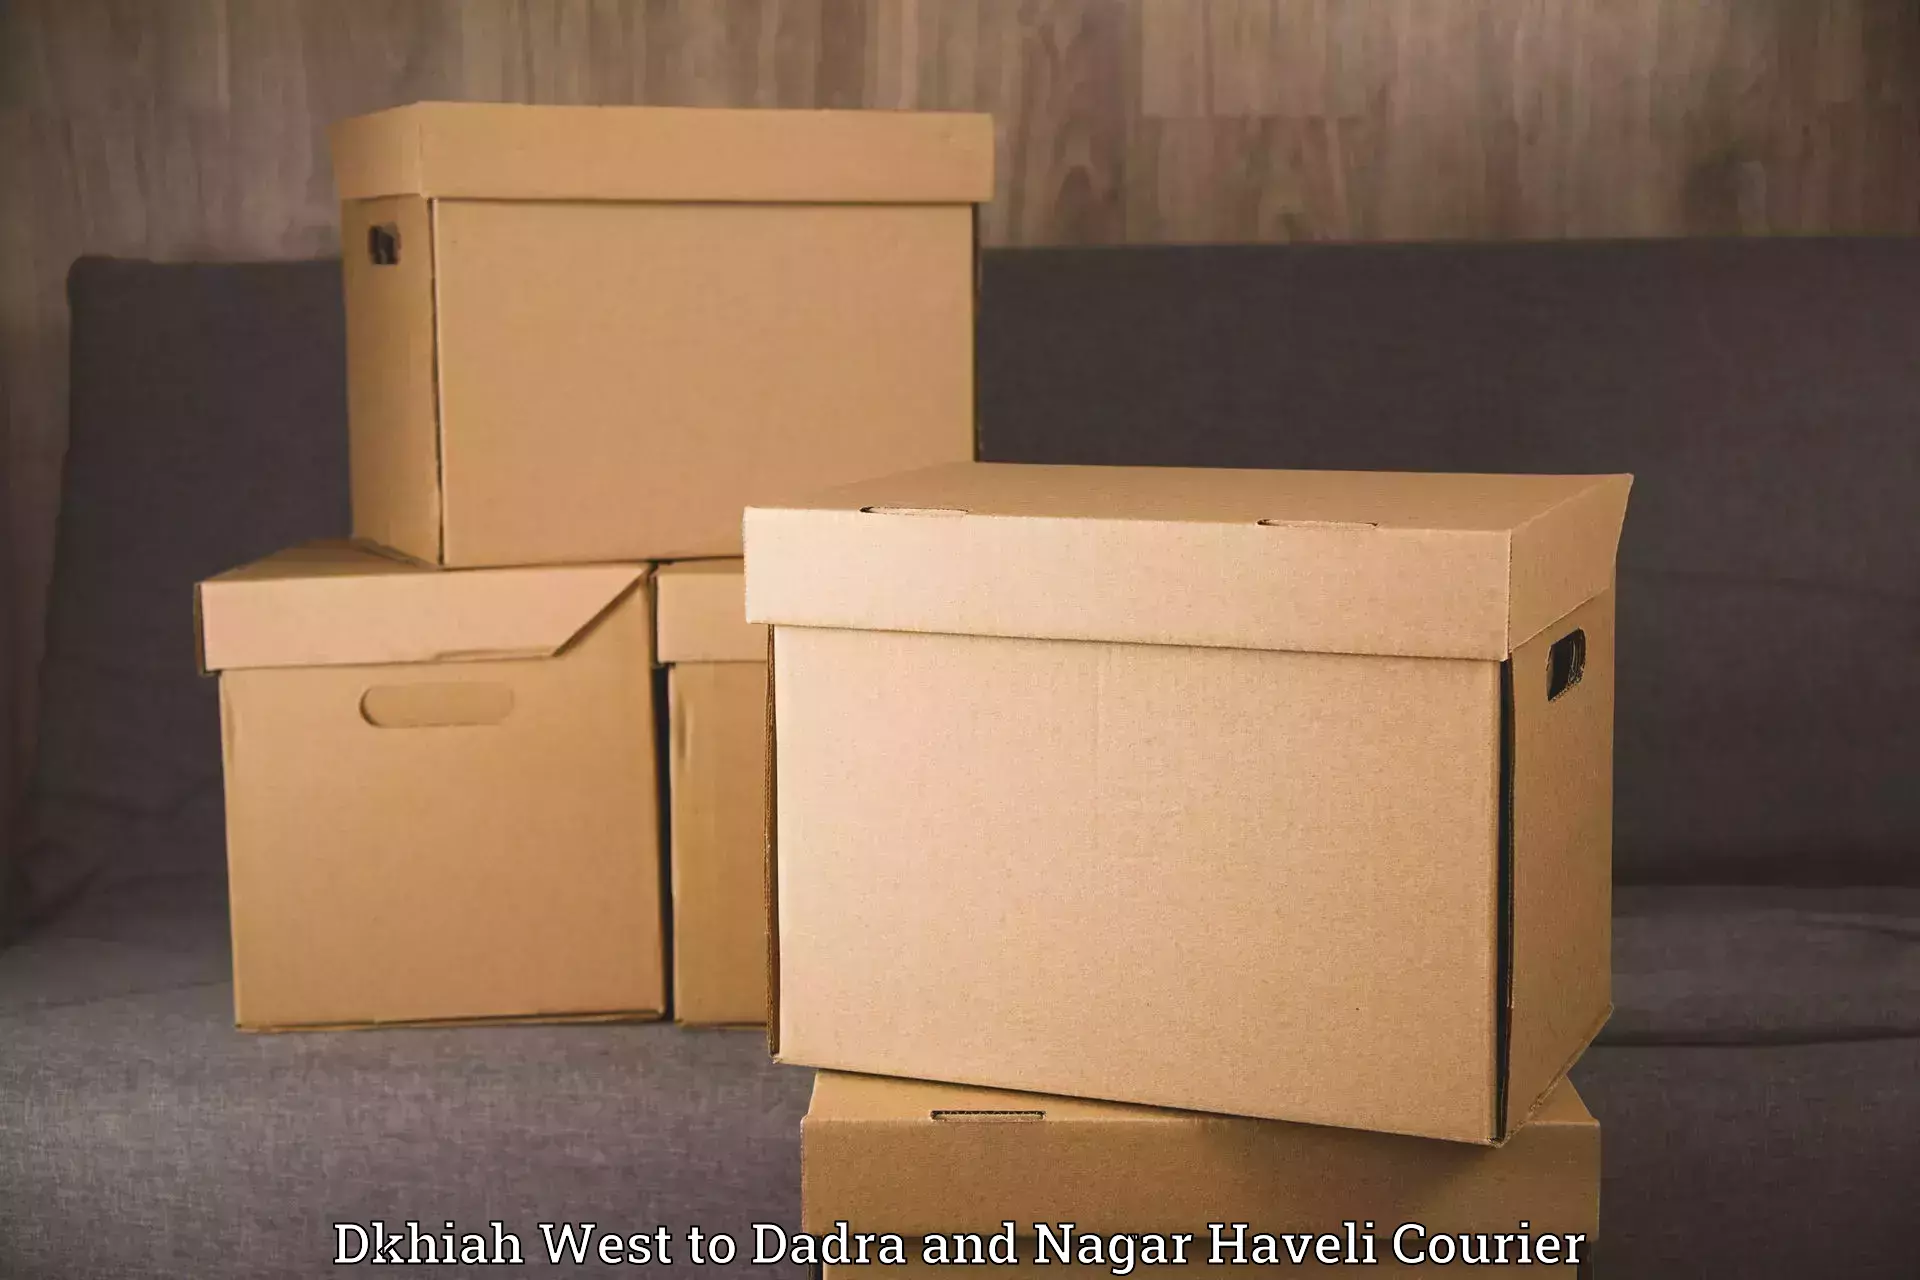 Reliable movers Dkhiah West to Dadra and Nagar Haveli